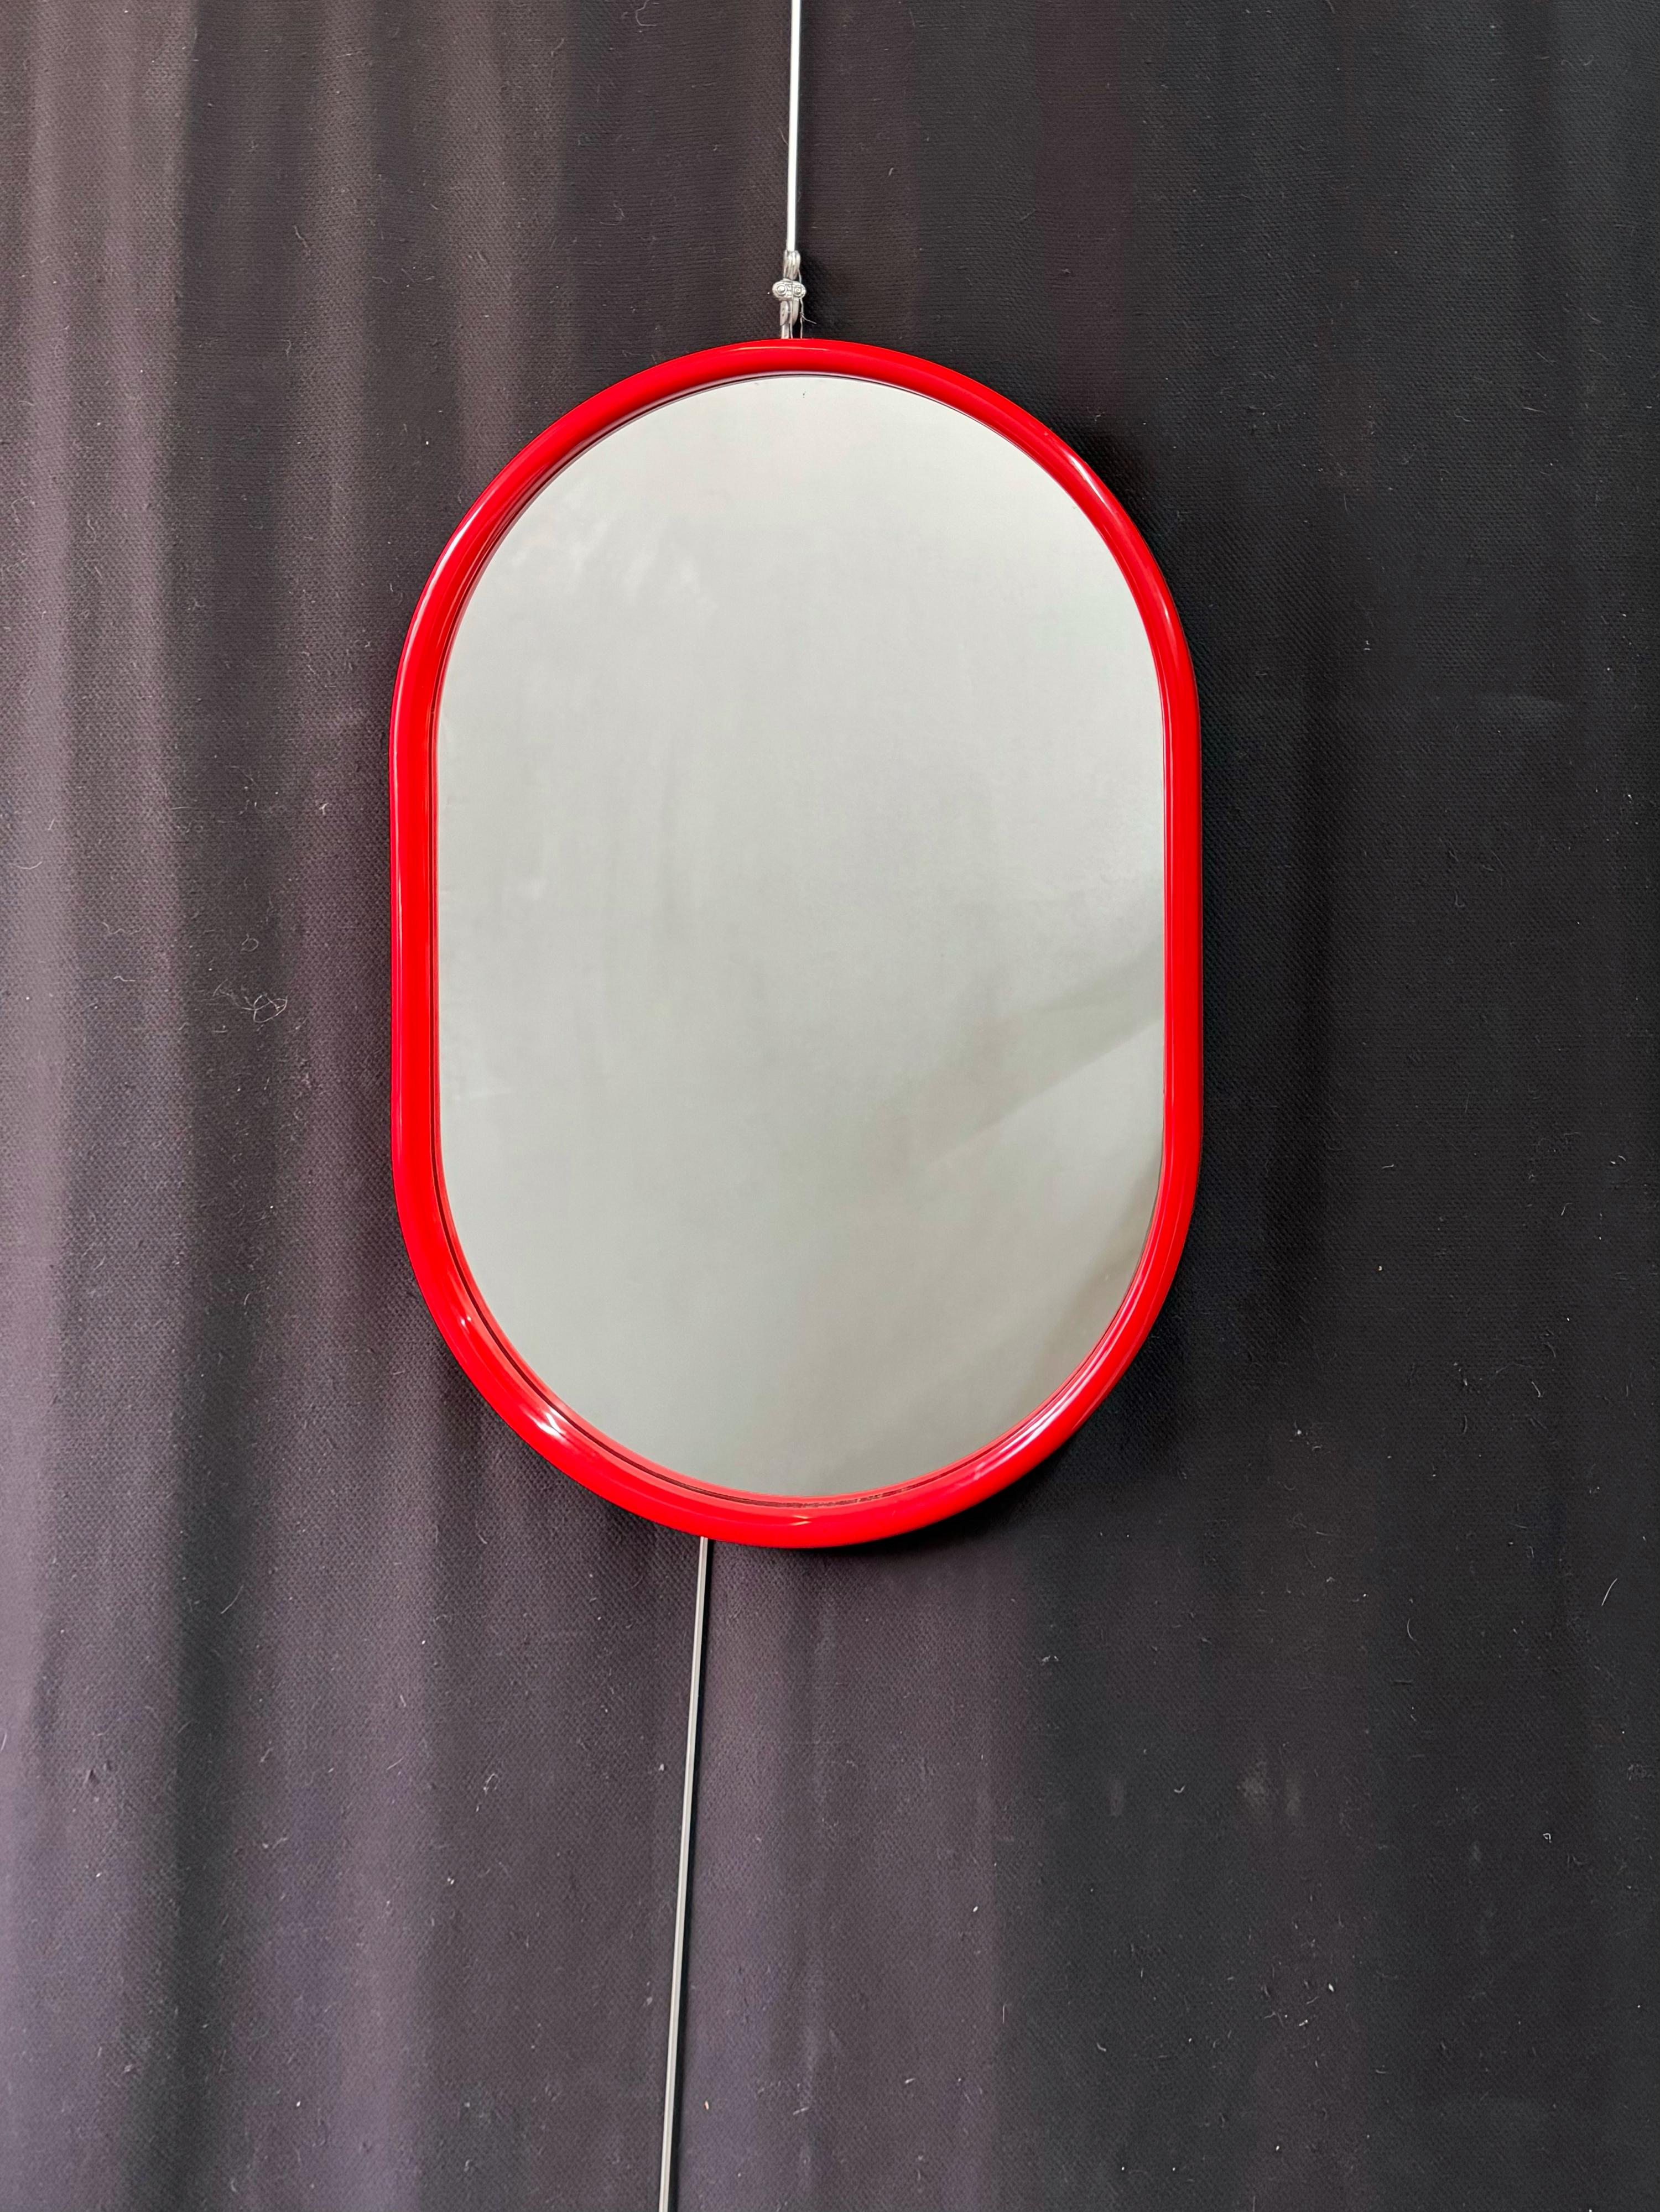 Italian 1960’s Mid Mod wall mirror with a bright red curved acrylic frame in an oval silhouette. Perfect vanity mirror to reflect your style and make your space pop!

The mirror measures 31” tall x 22” wide x 1.5” deep. 
